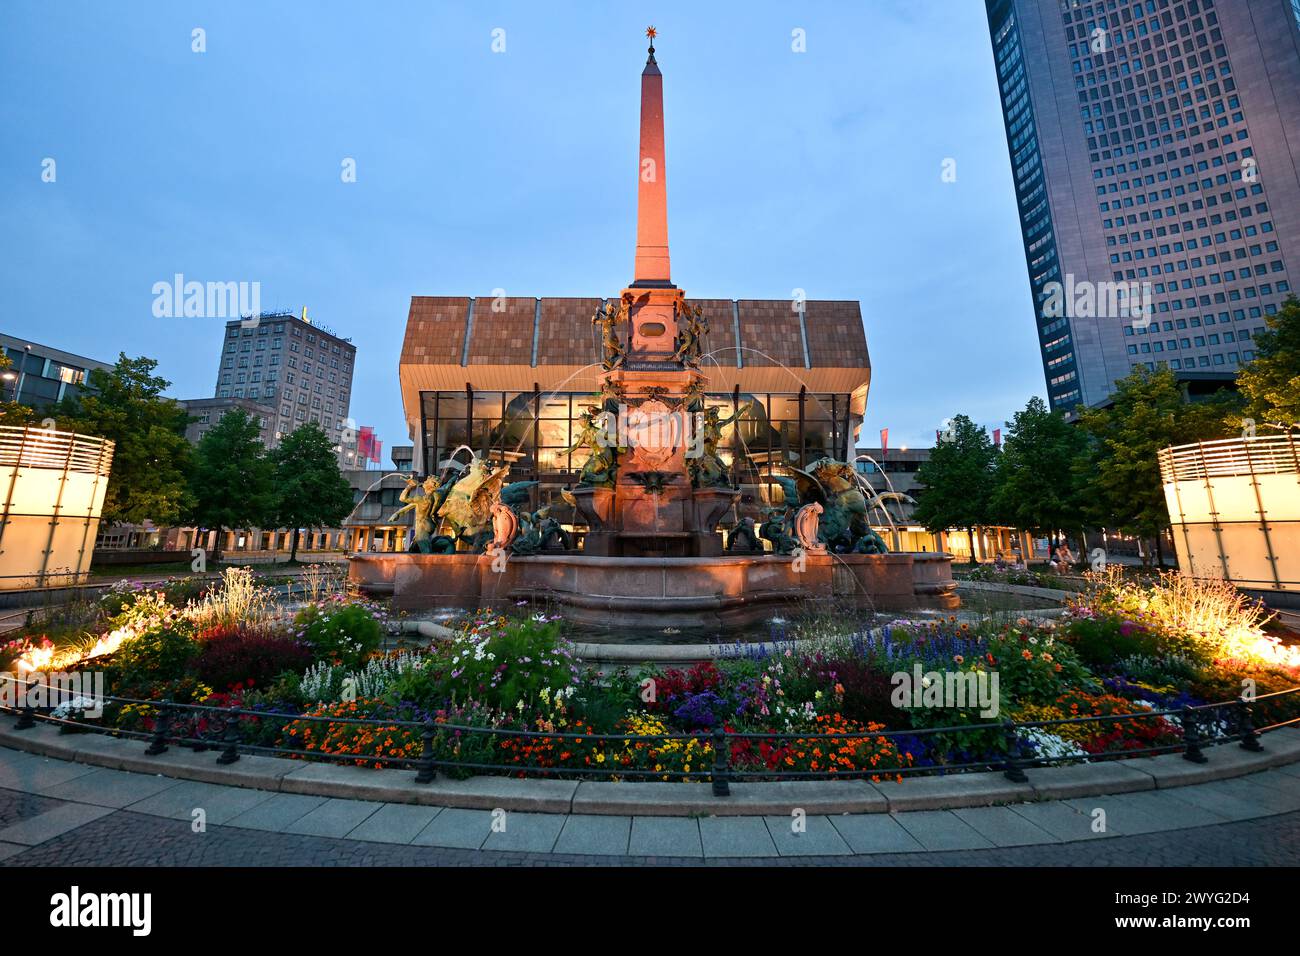 The Gewandhaus and Mendebrunnen in Leipzig, Germany at night Stock Photo